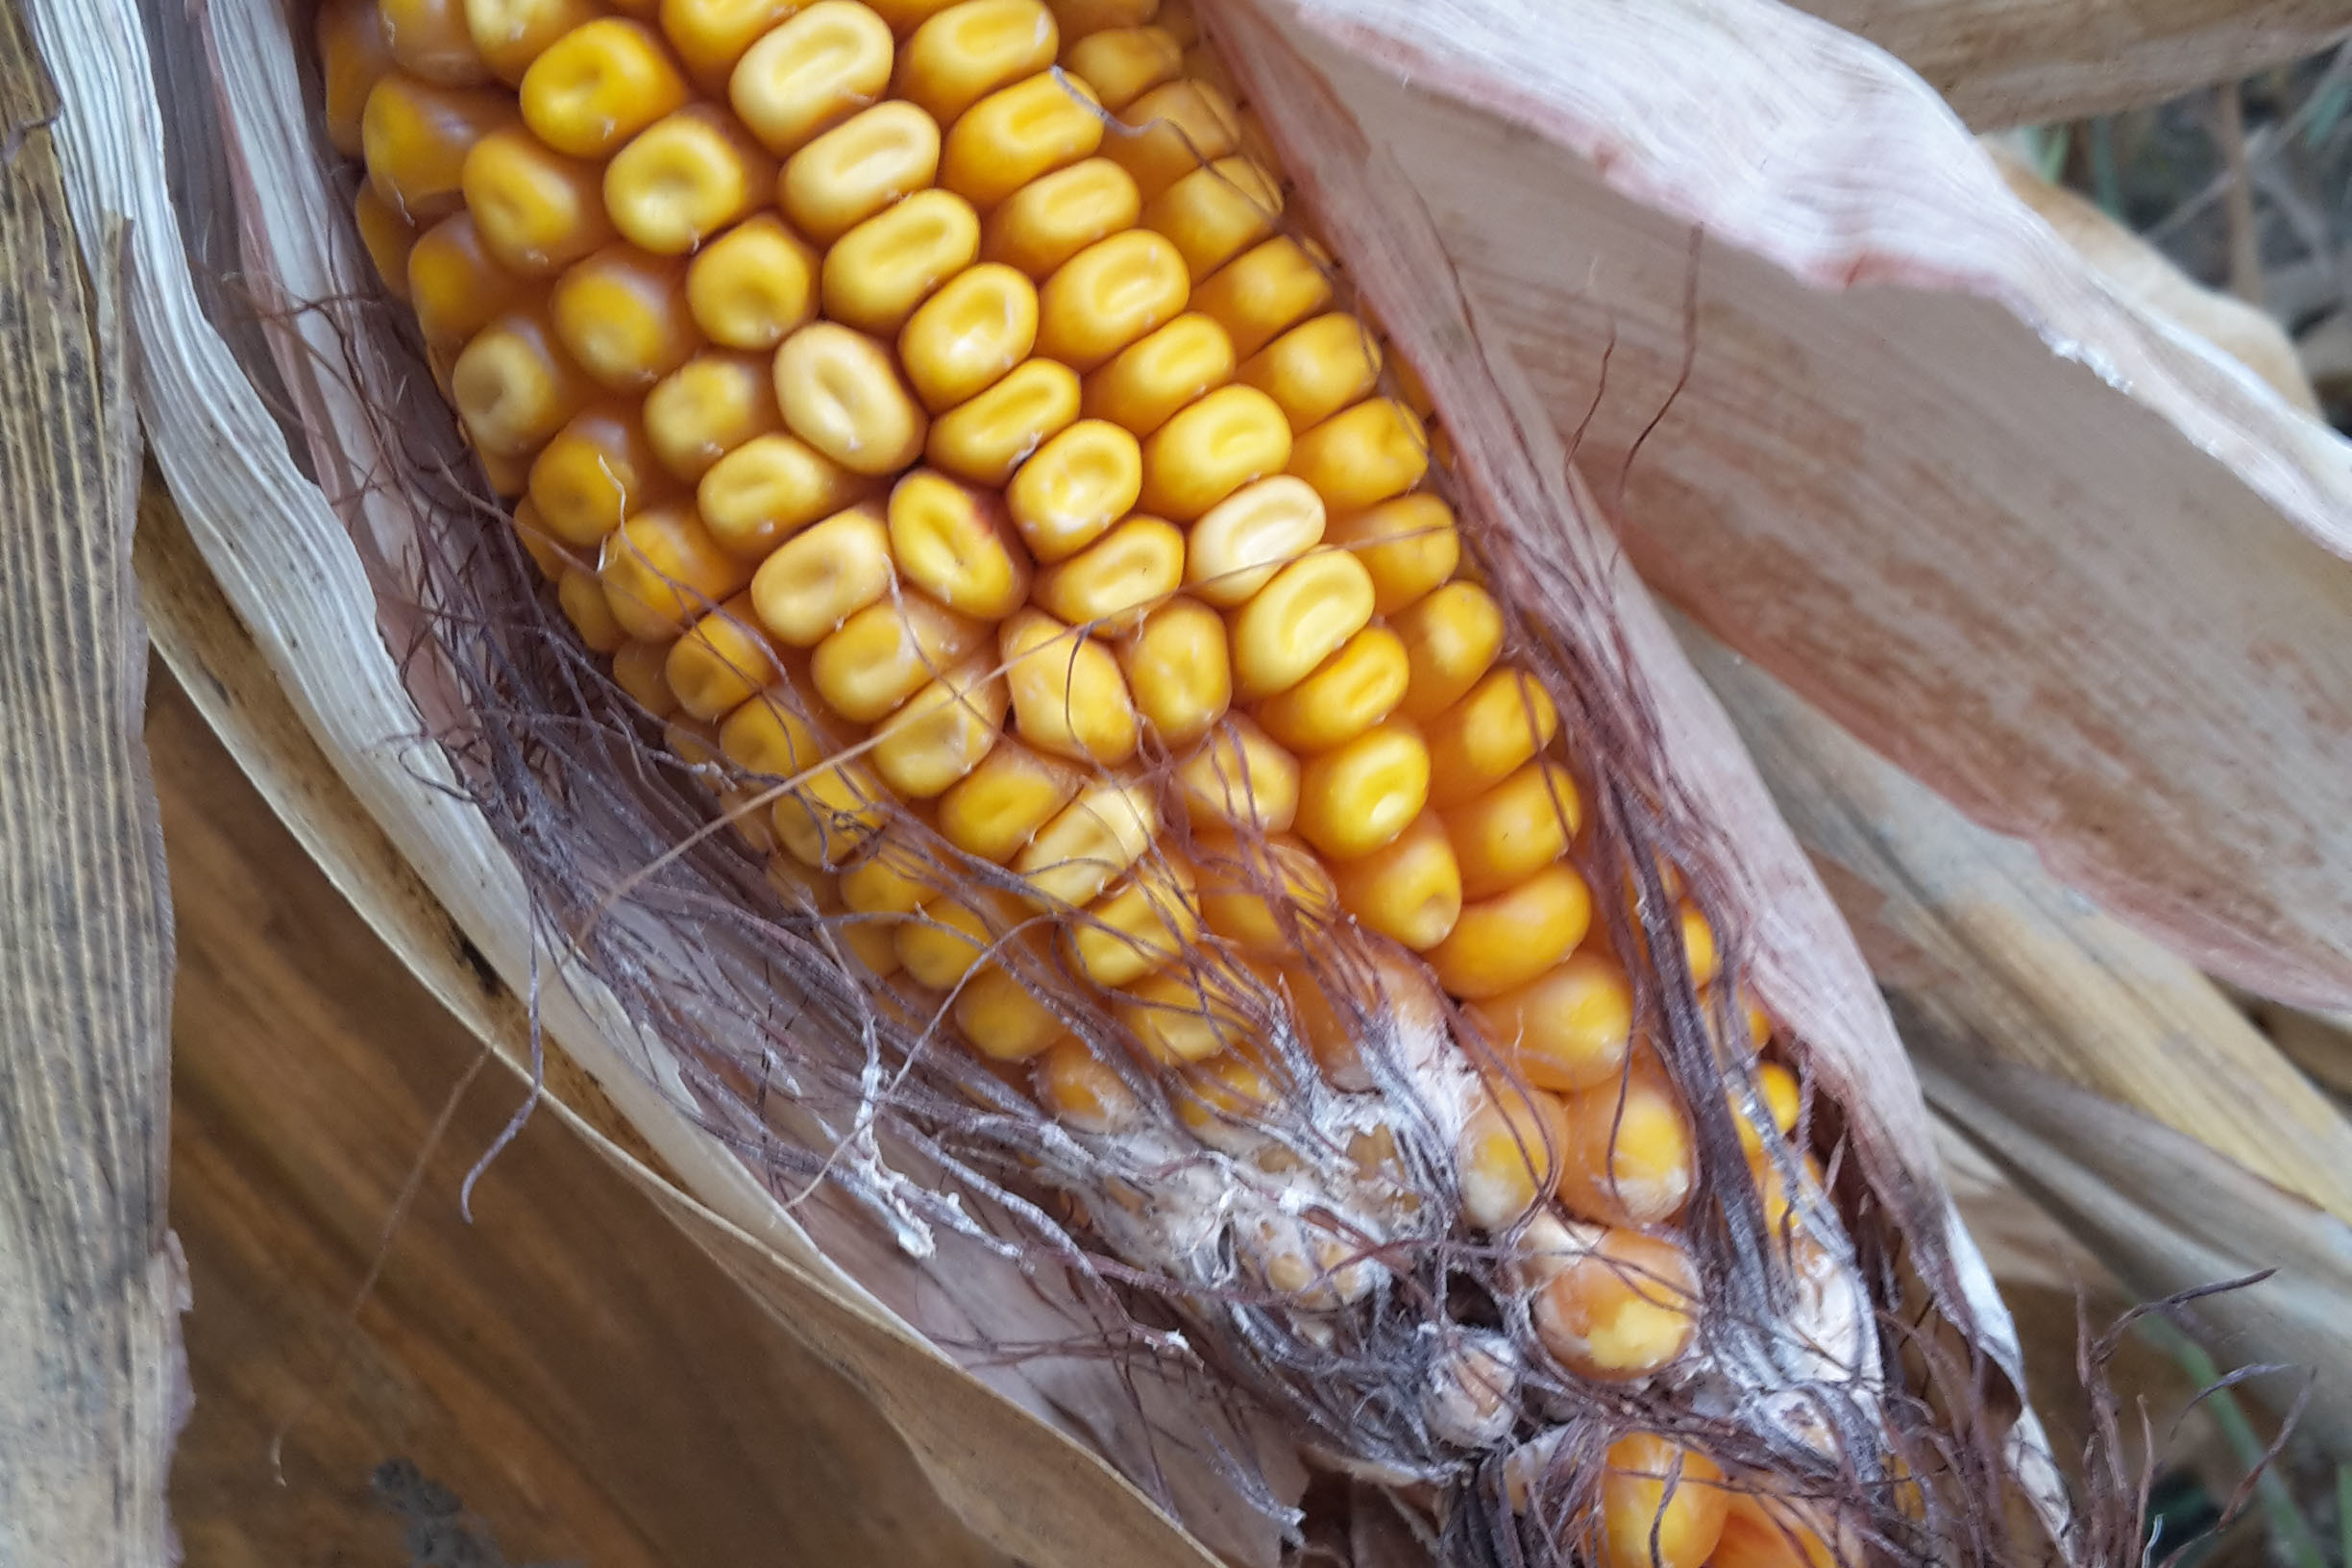 Spanish and Polish maize tested for mycotoxins